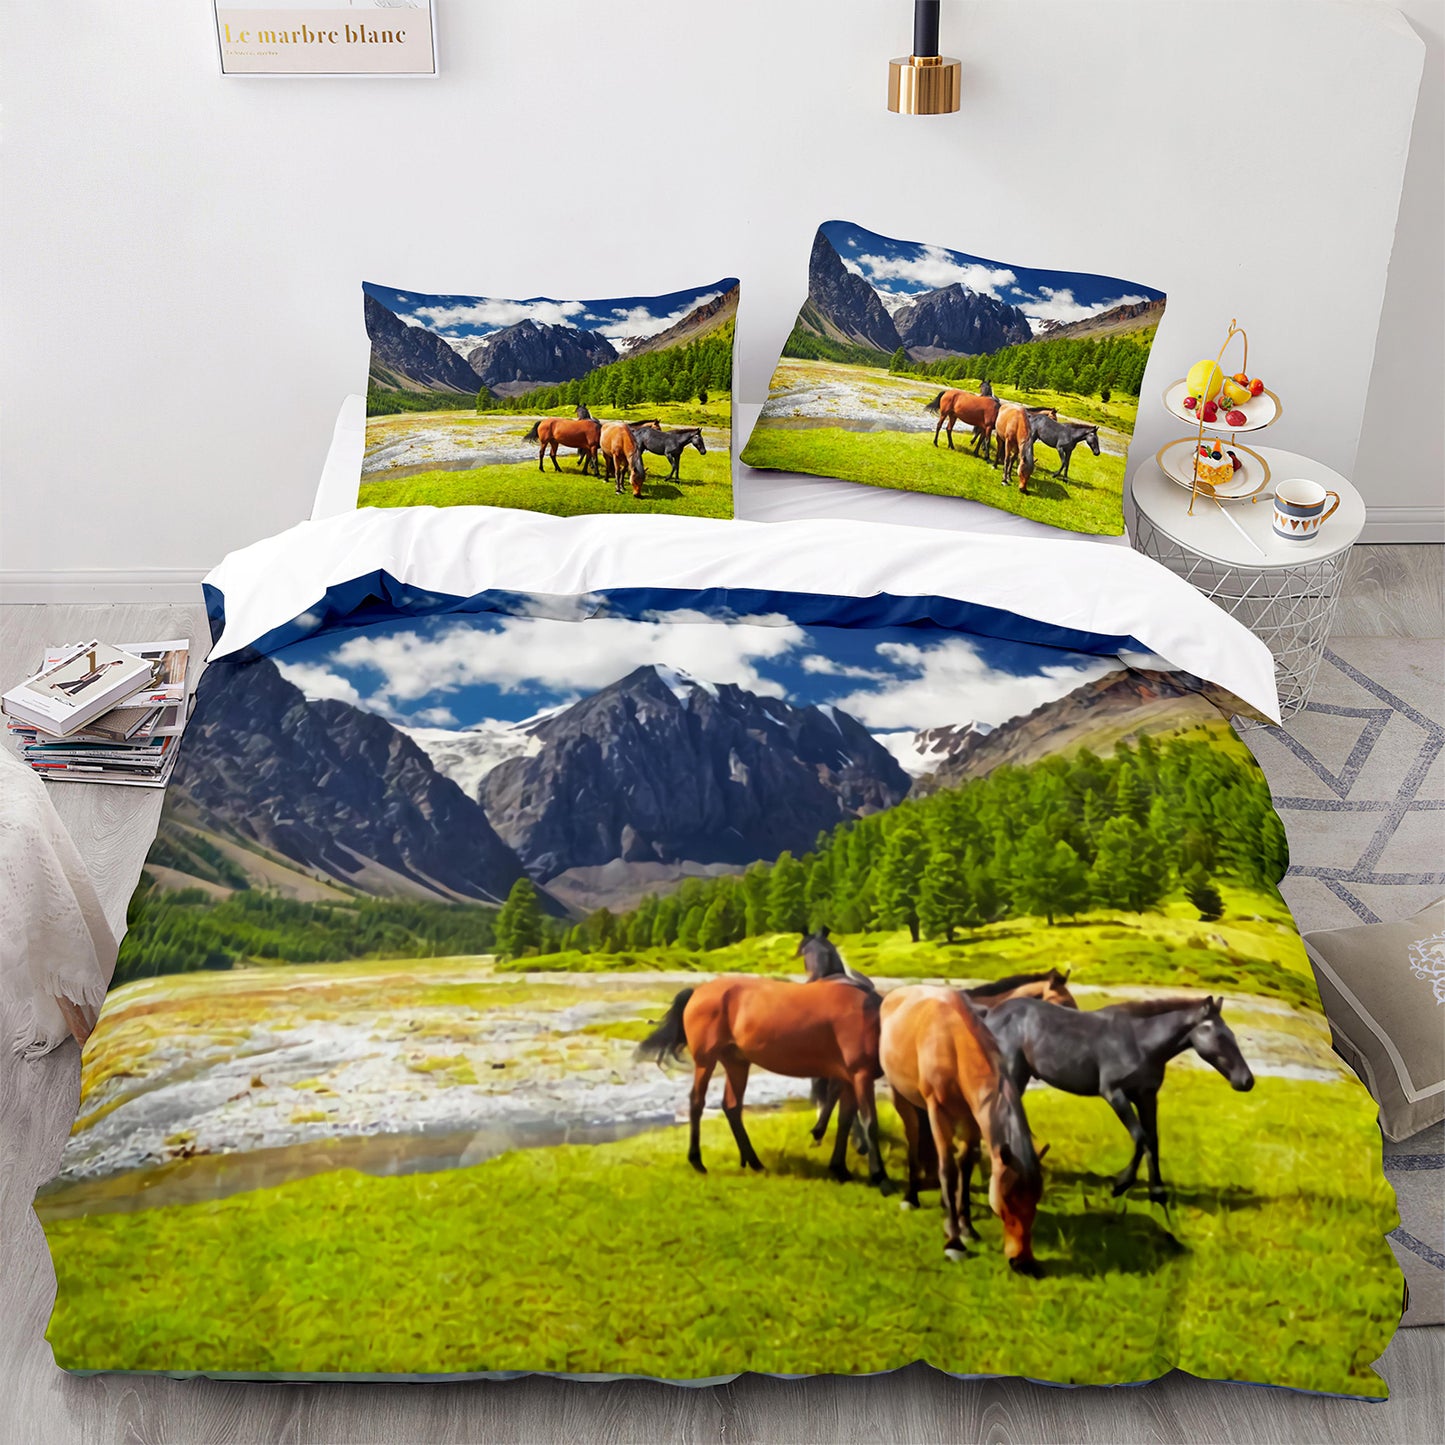 Cutom Duvet Cover Set Pattern Chic Comforter Cover King Size for Teens Adults Bedding Set with Pillowcases  M1090